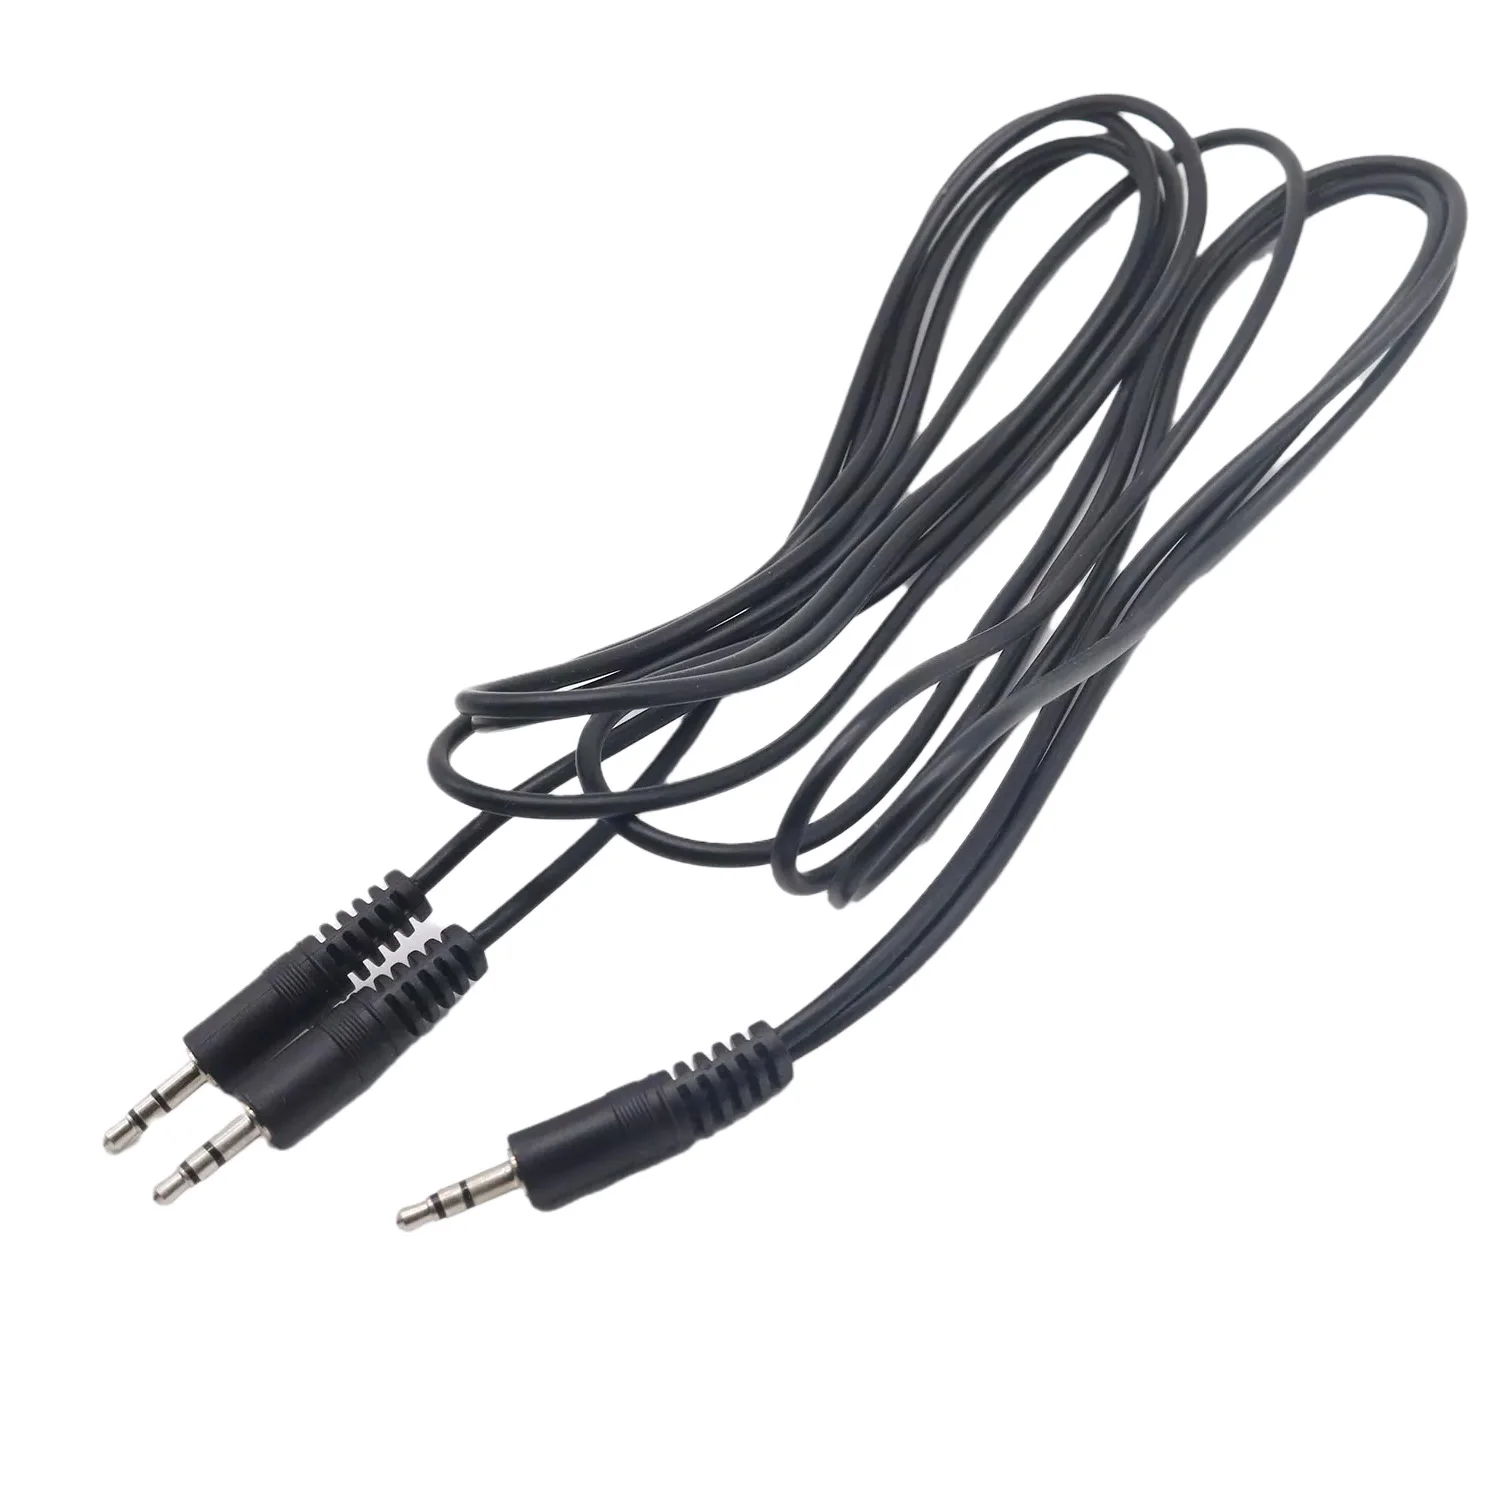 

1pc 3.5mm 1/8" TRS 3 Pole Male Plug To Dual 3.5mm Male Y Splitter Stereo Headphone Audio Cable for Speaker Pc 5FT